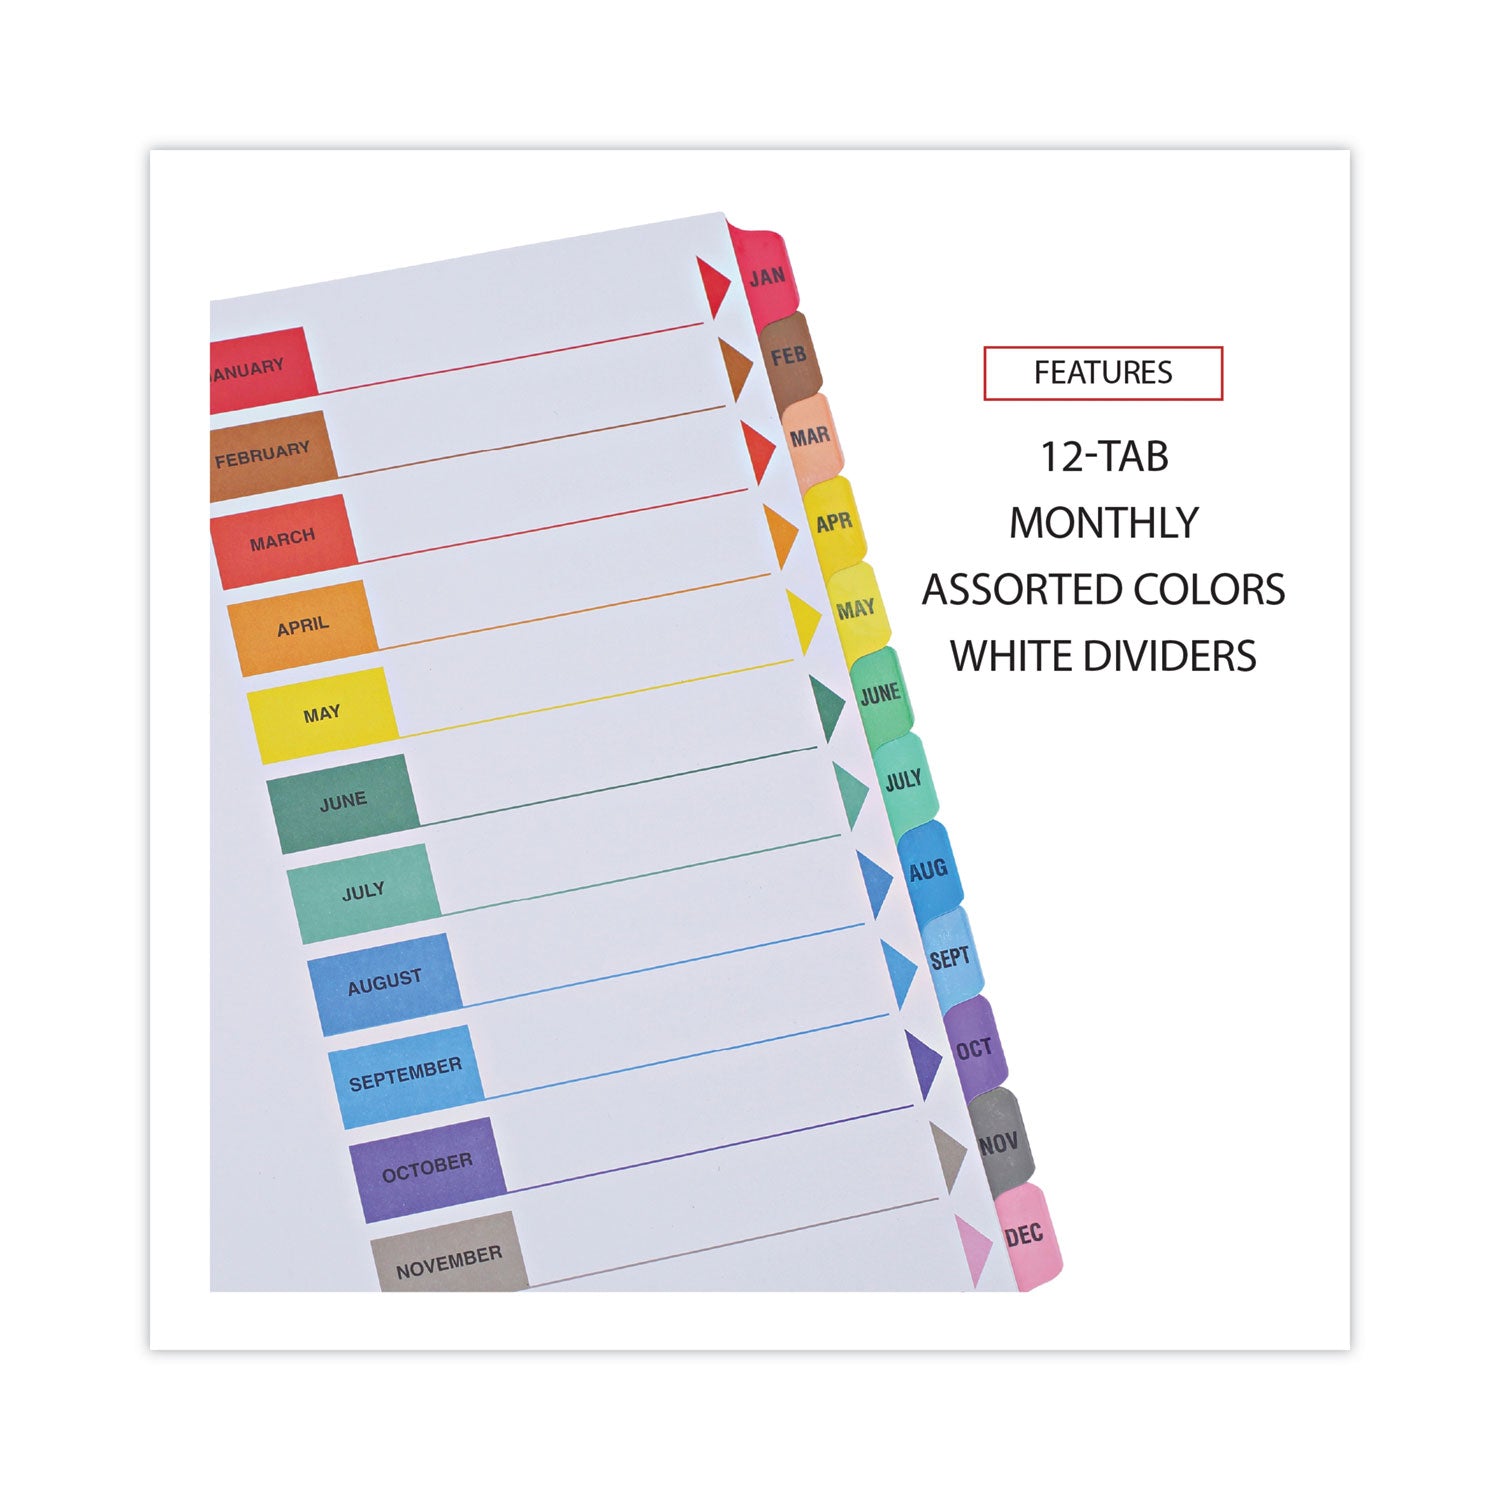 Deluxe Table of Contents Dividers for Printers, 12-Tab, Jan. to Dec., 11 x 8.5, White, 1 Set - 